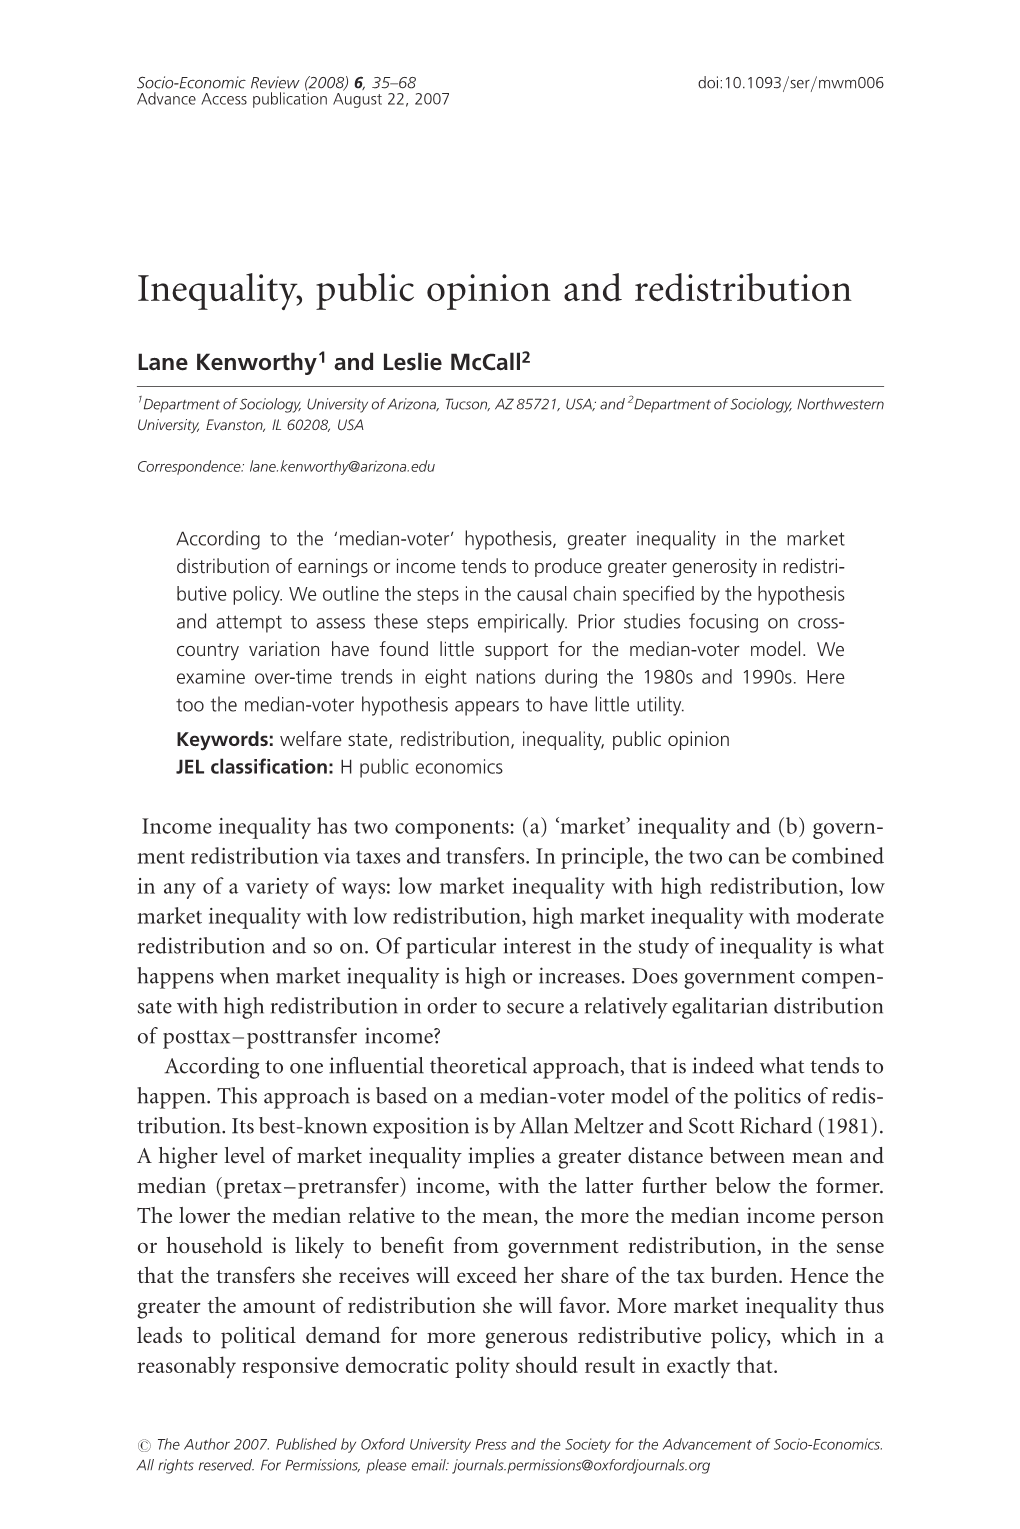 Inequality, Public Opinion and Redistribution